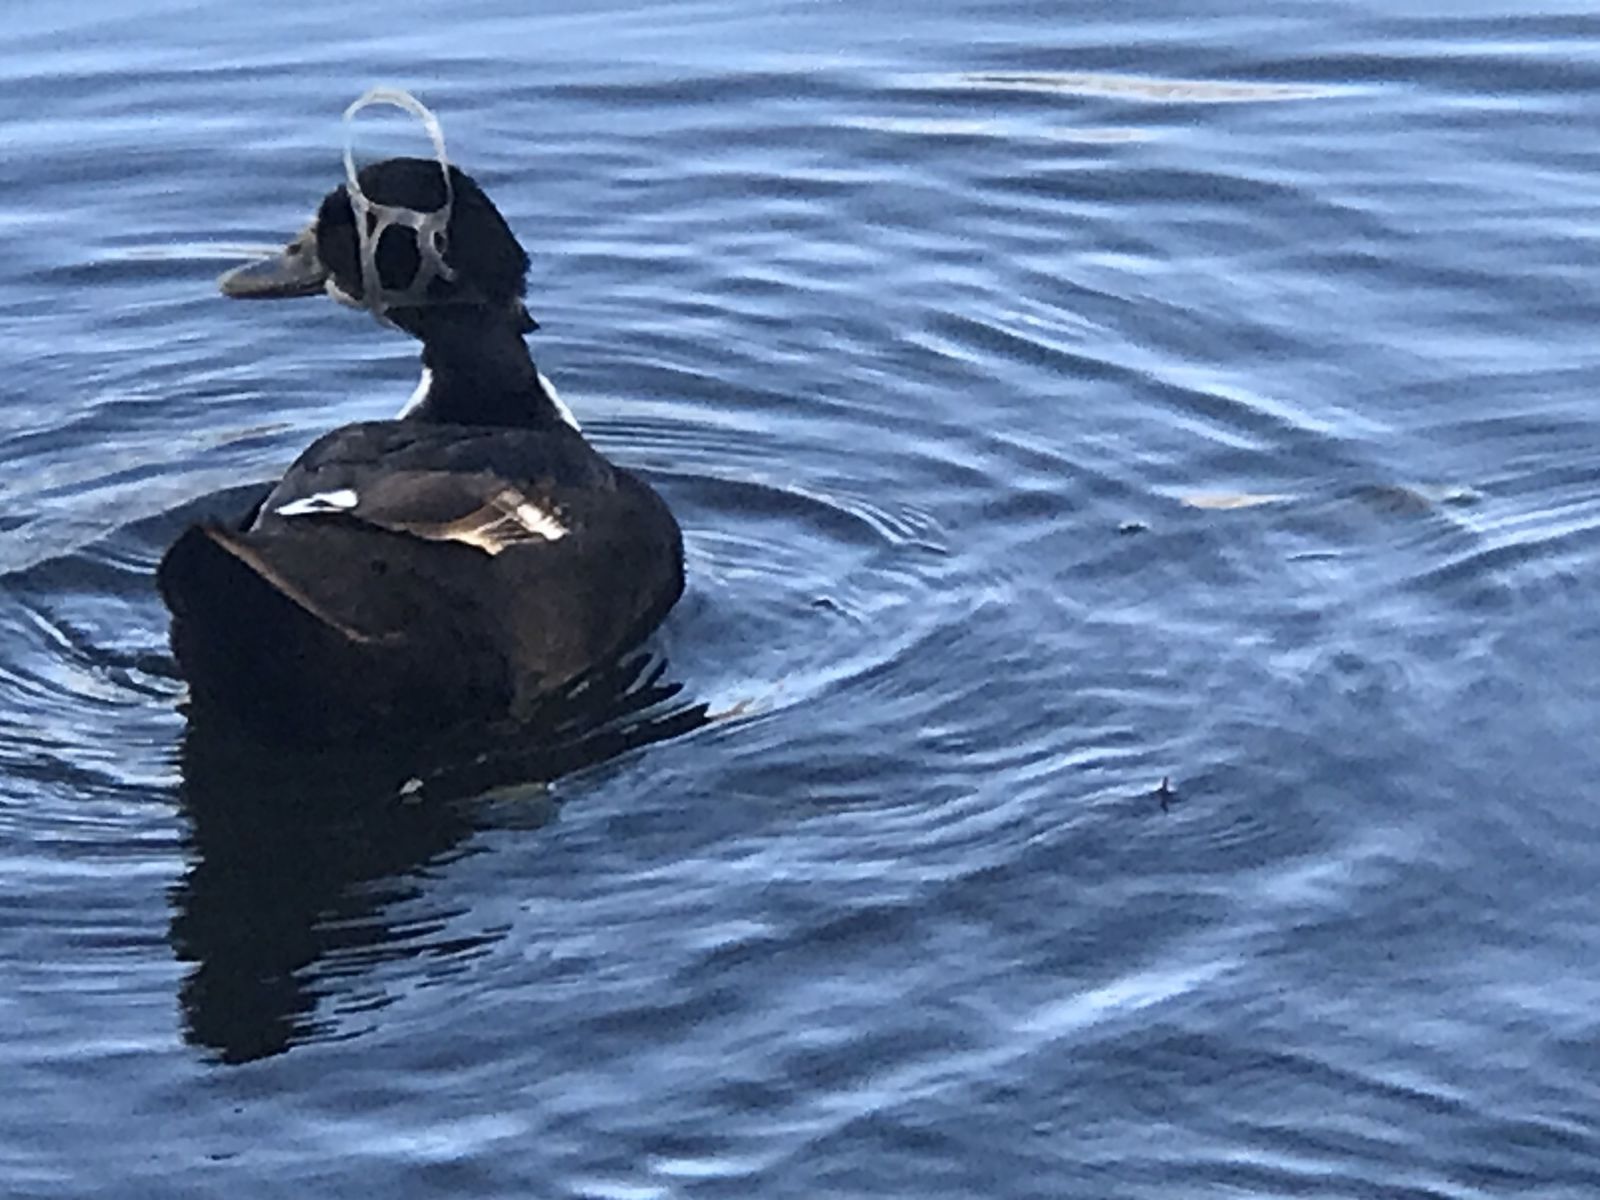 Duck with a plastic multipack can holder caught over its head